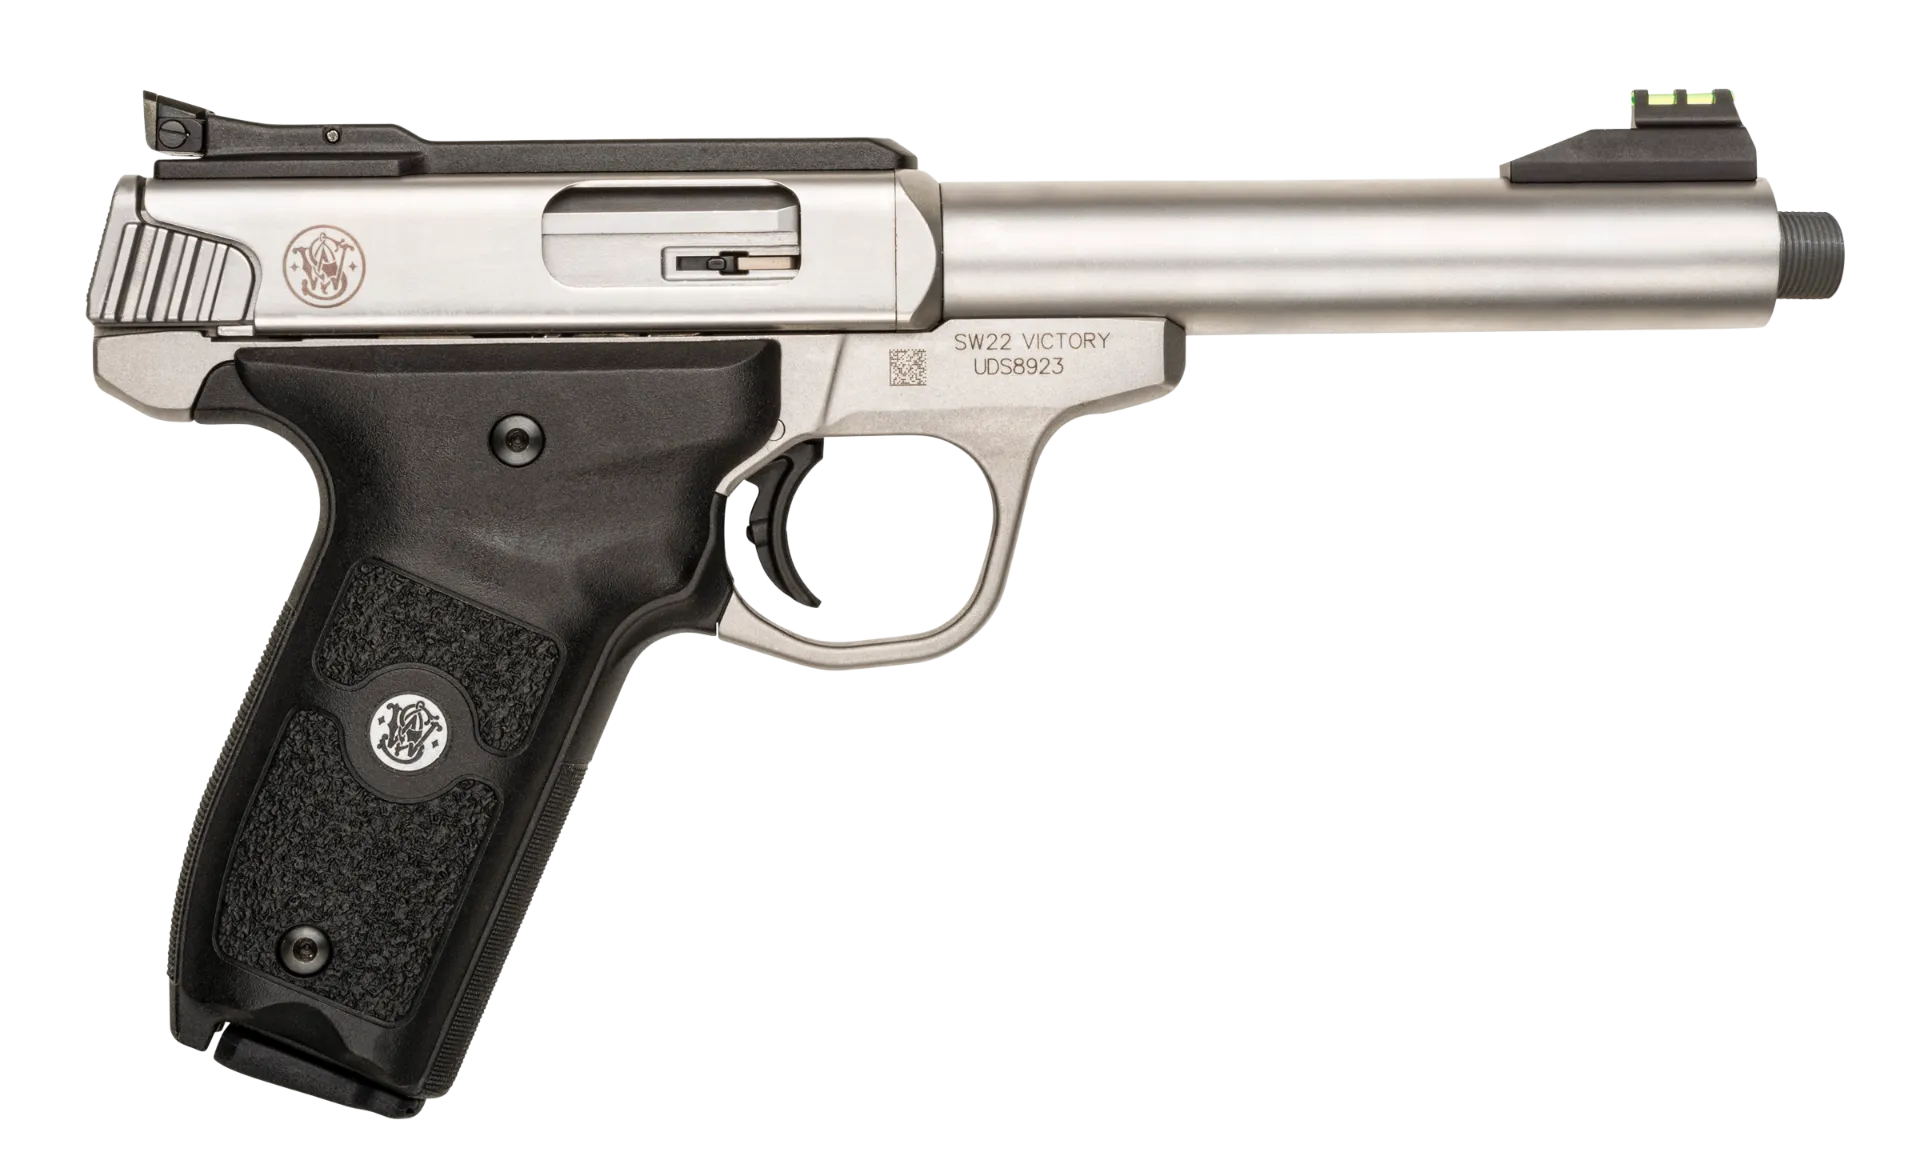 SMITH & WESSON SW22 VICTORY THREADED BARREL